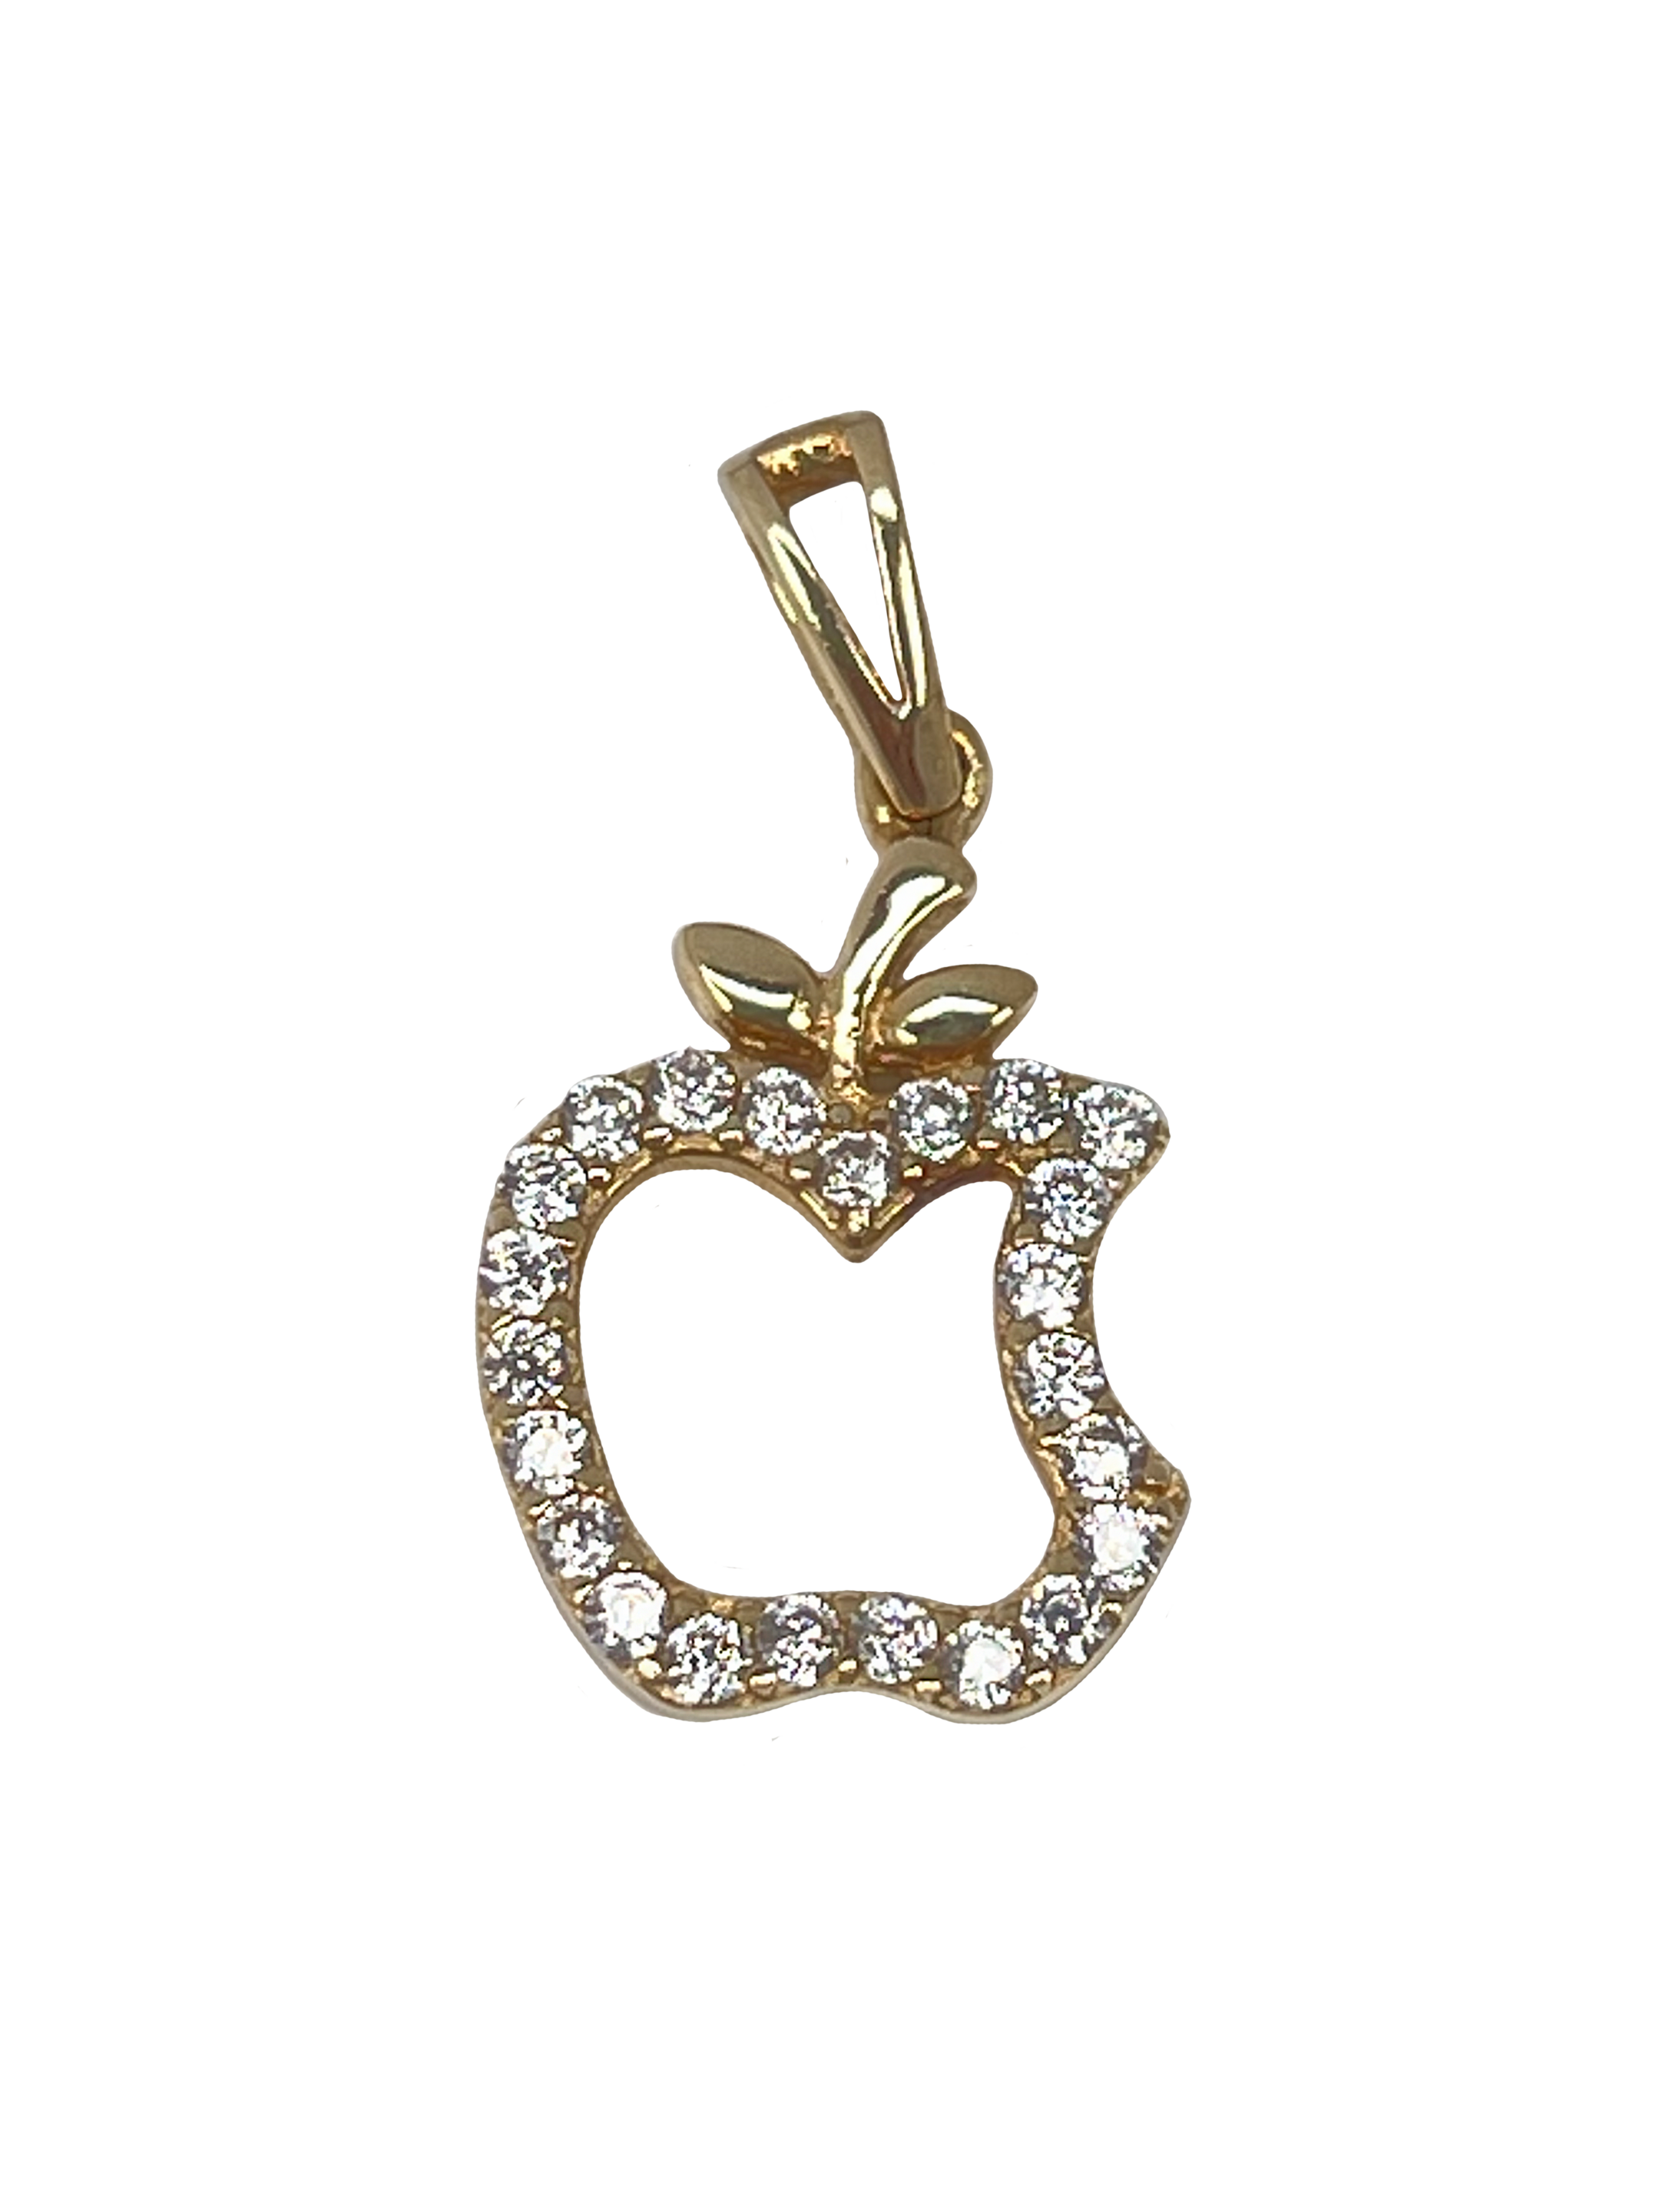 Gold apple pendant made of yellow gold with zircons